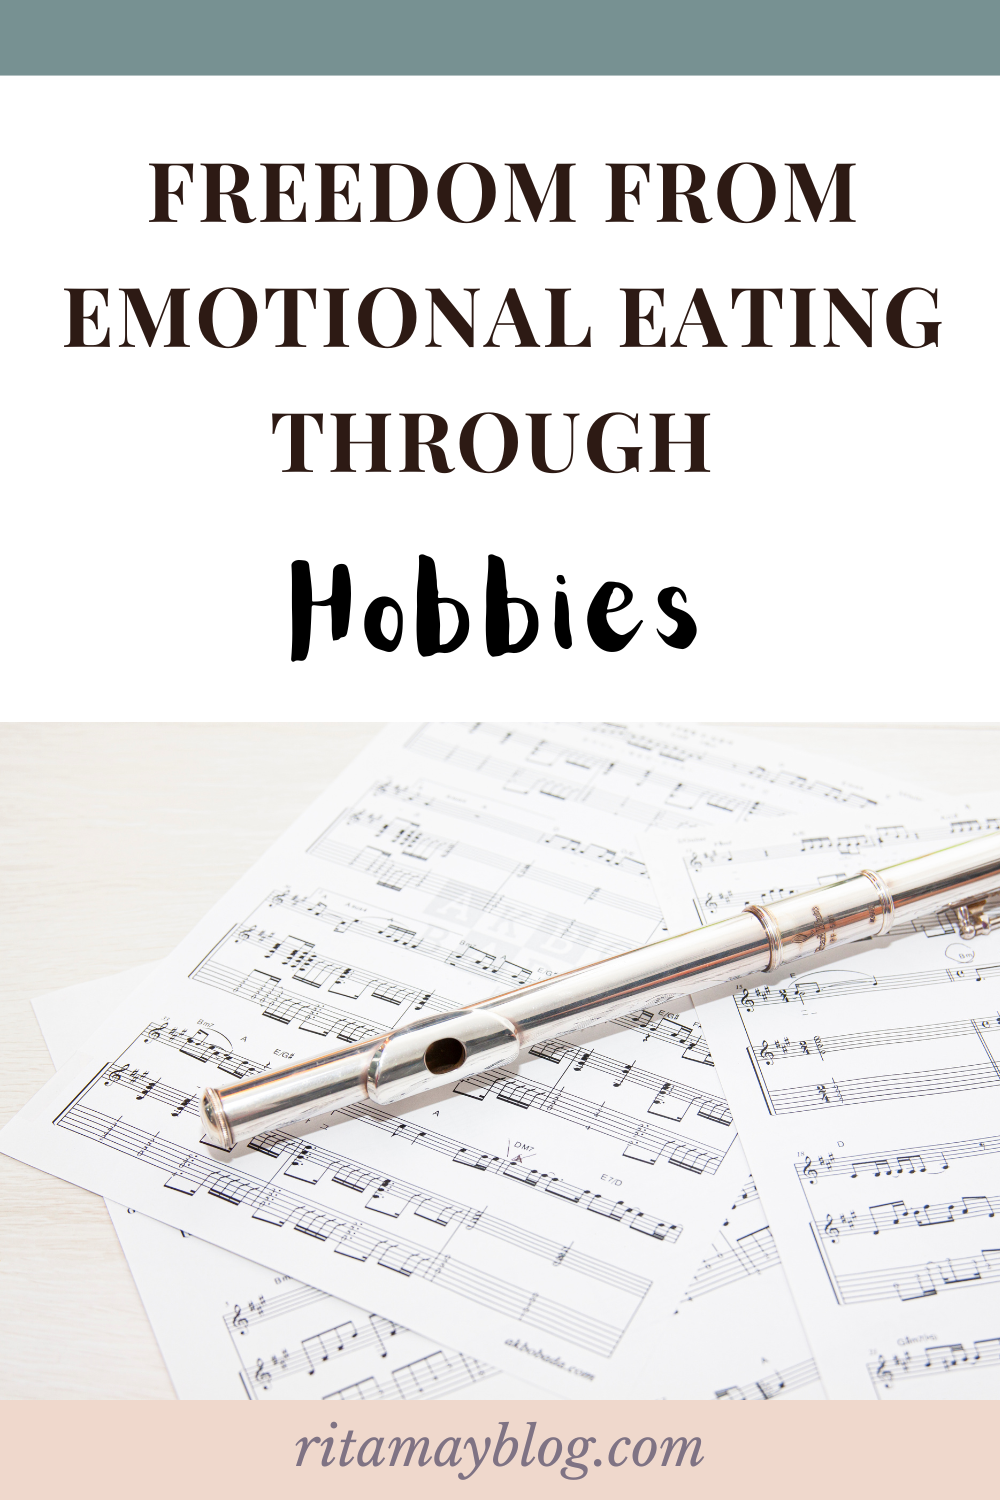 Freedom from emotional eating through hobbies